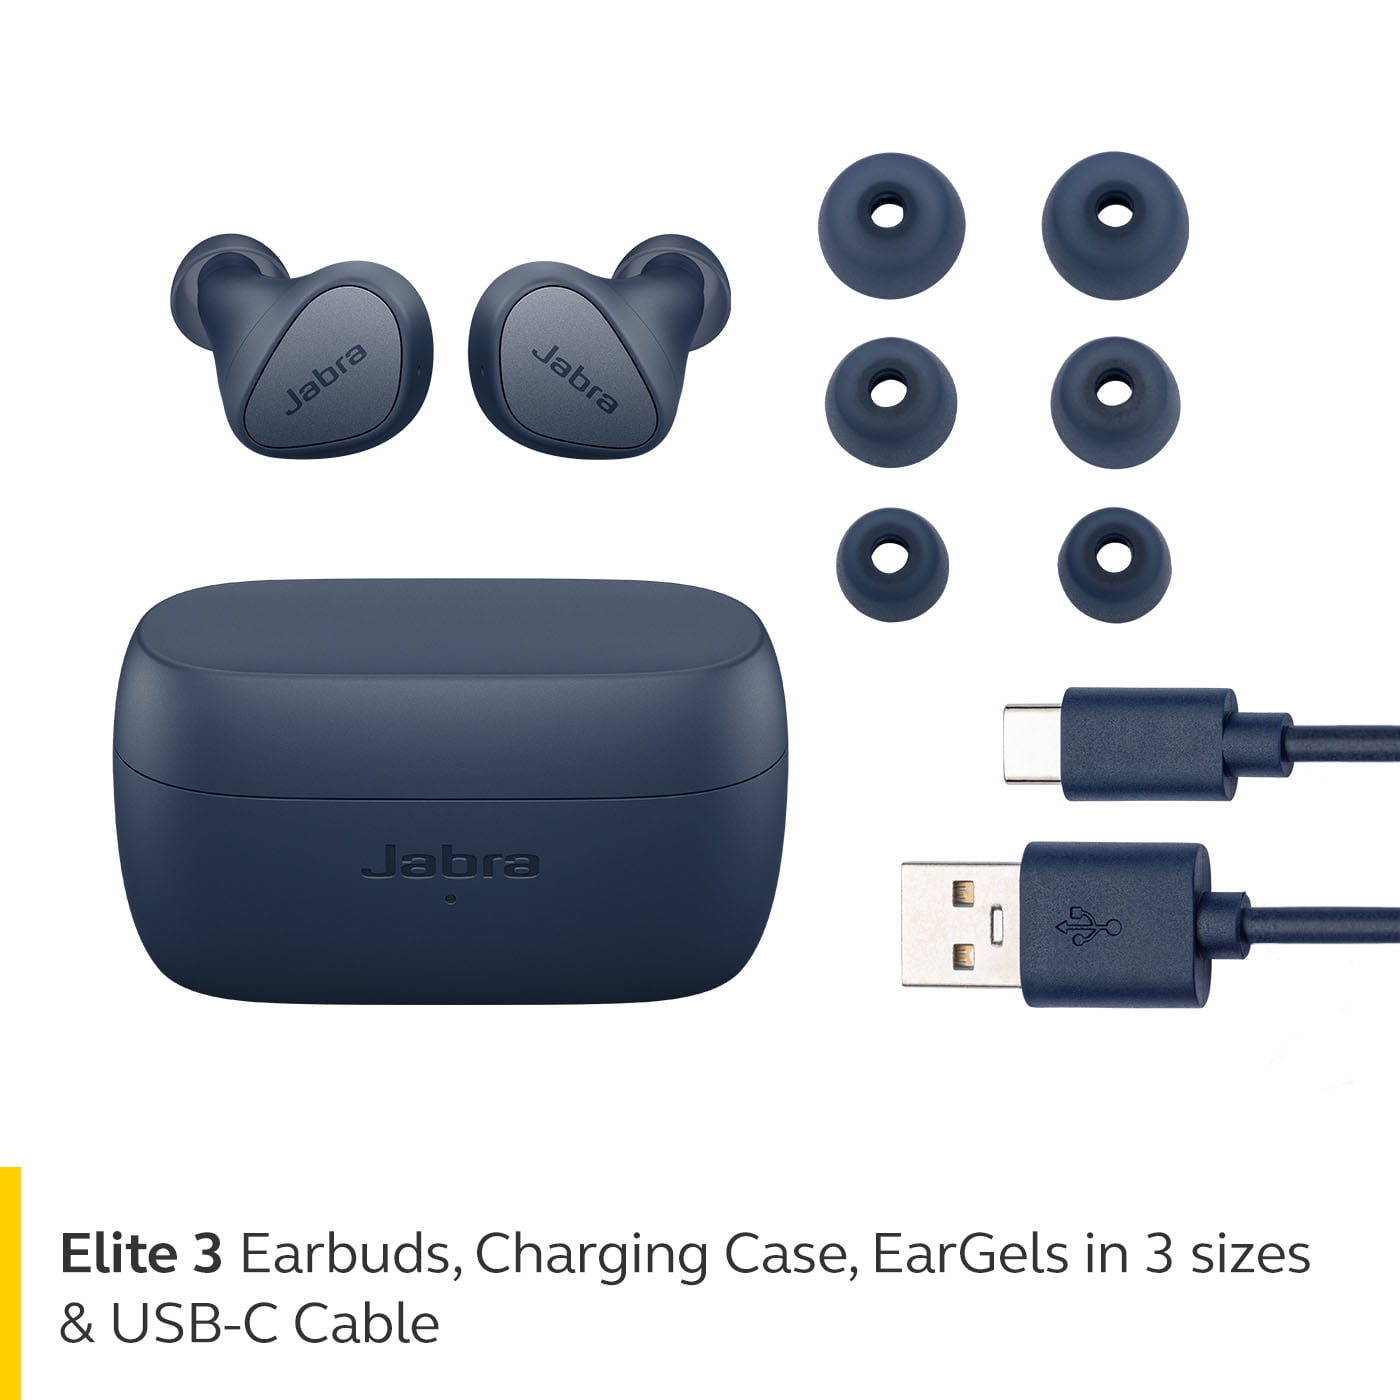 Gifts That Make Life Easier – Jabra Wireless Earbuds